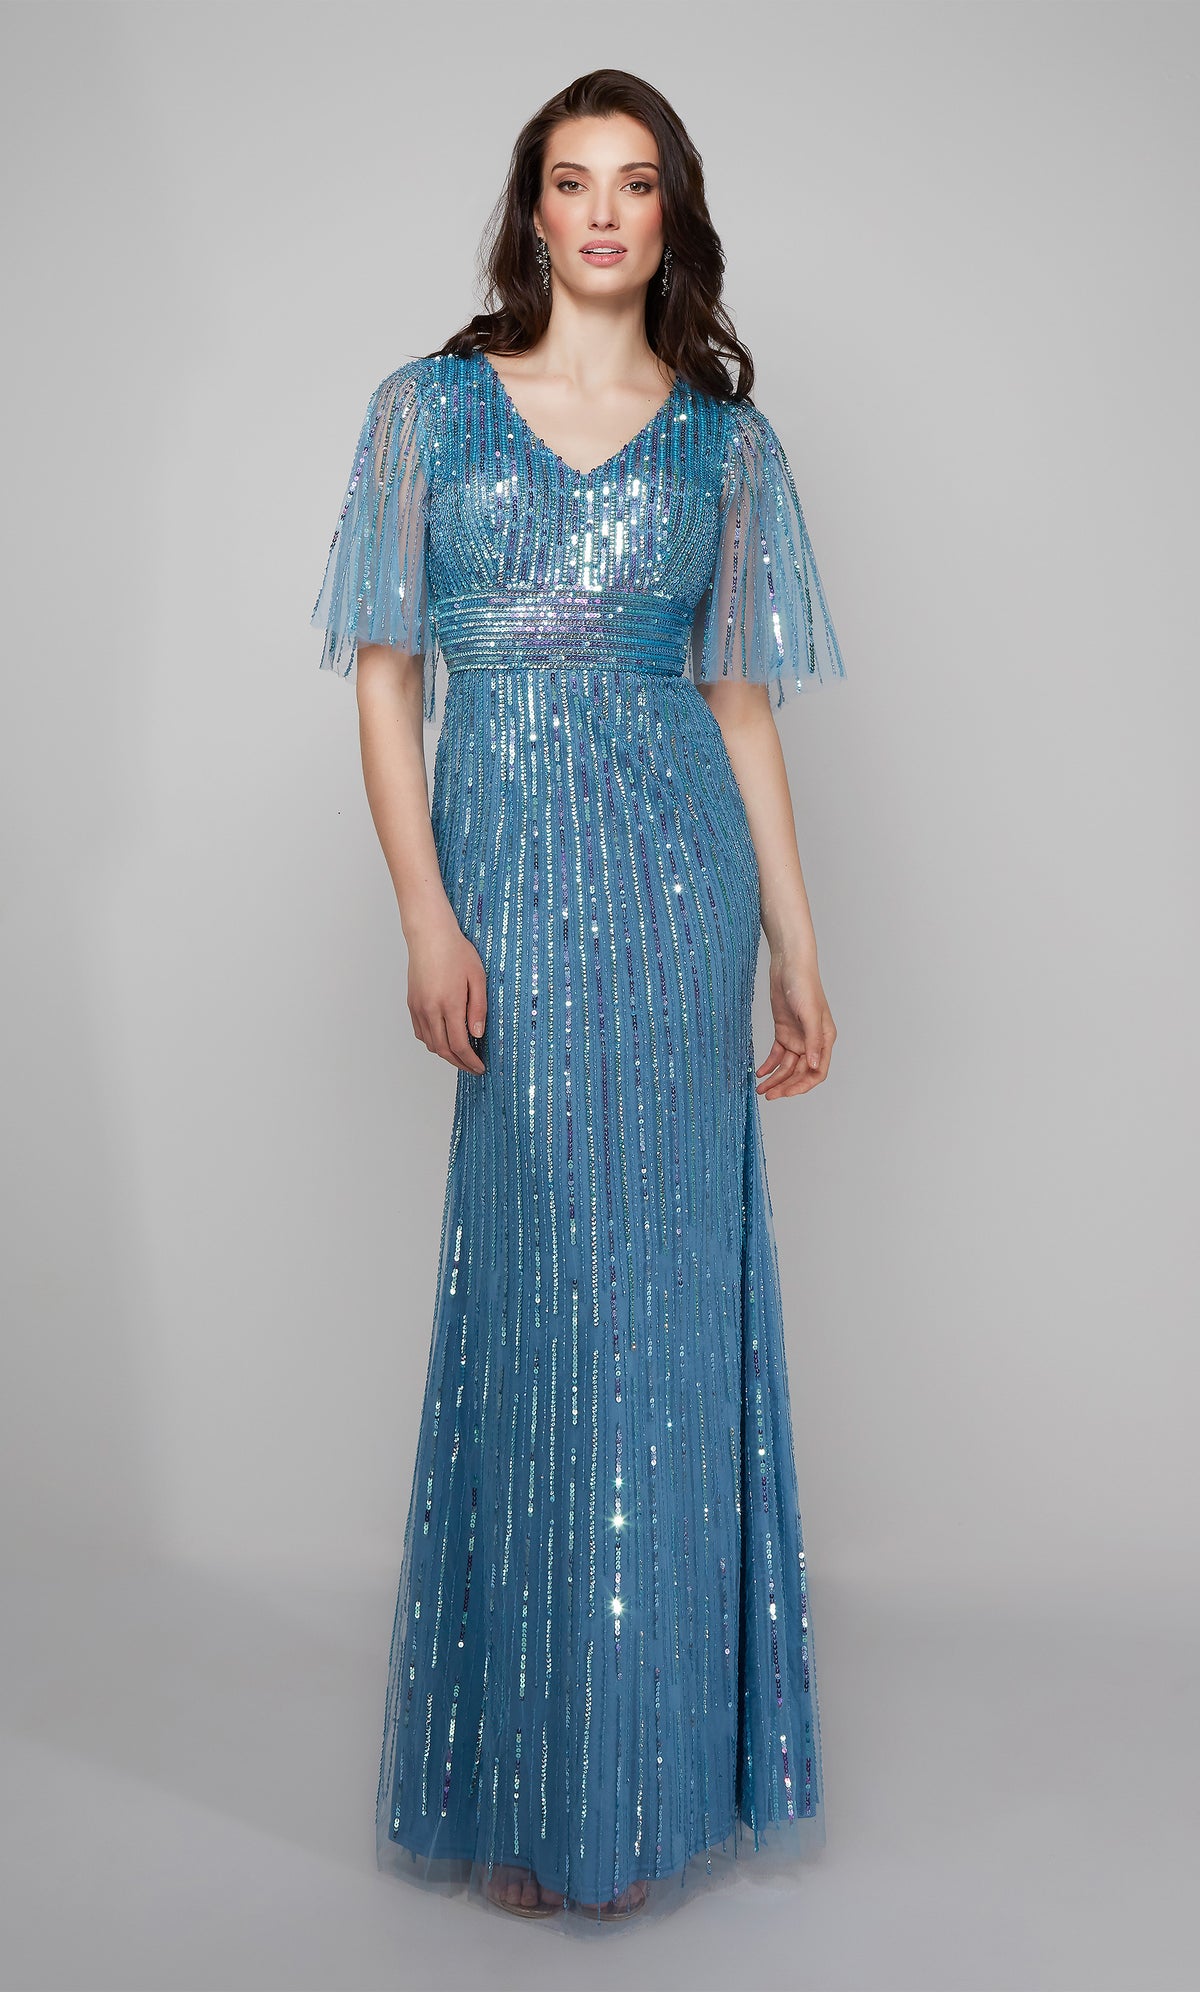 Sequin capelet gown with a V neck in blue.